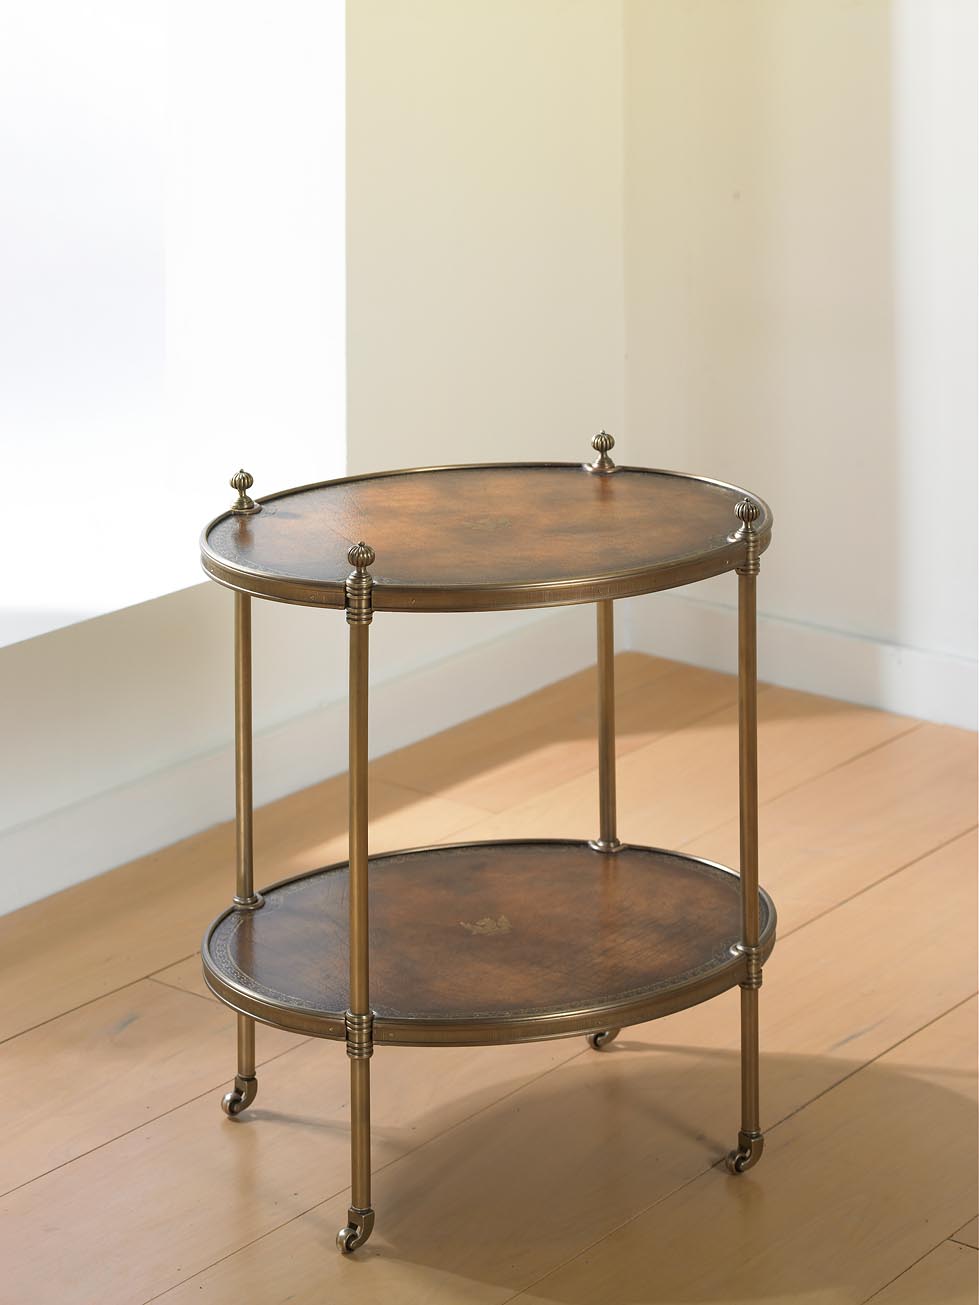 OVAL TIERS SIDE TABLE